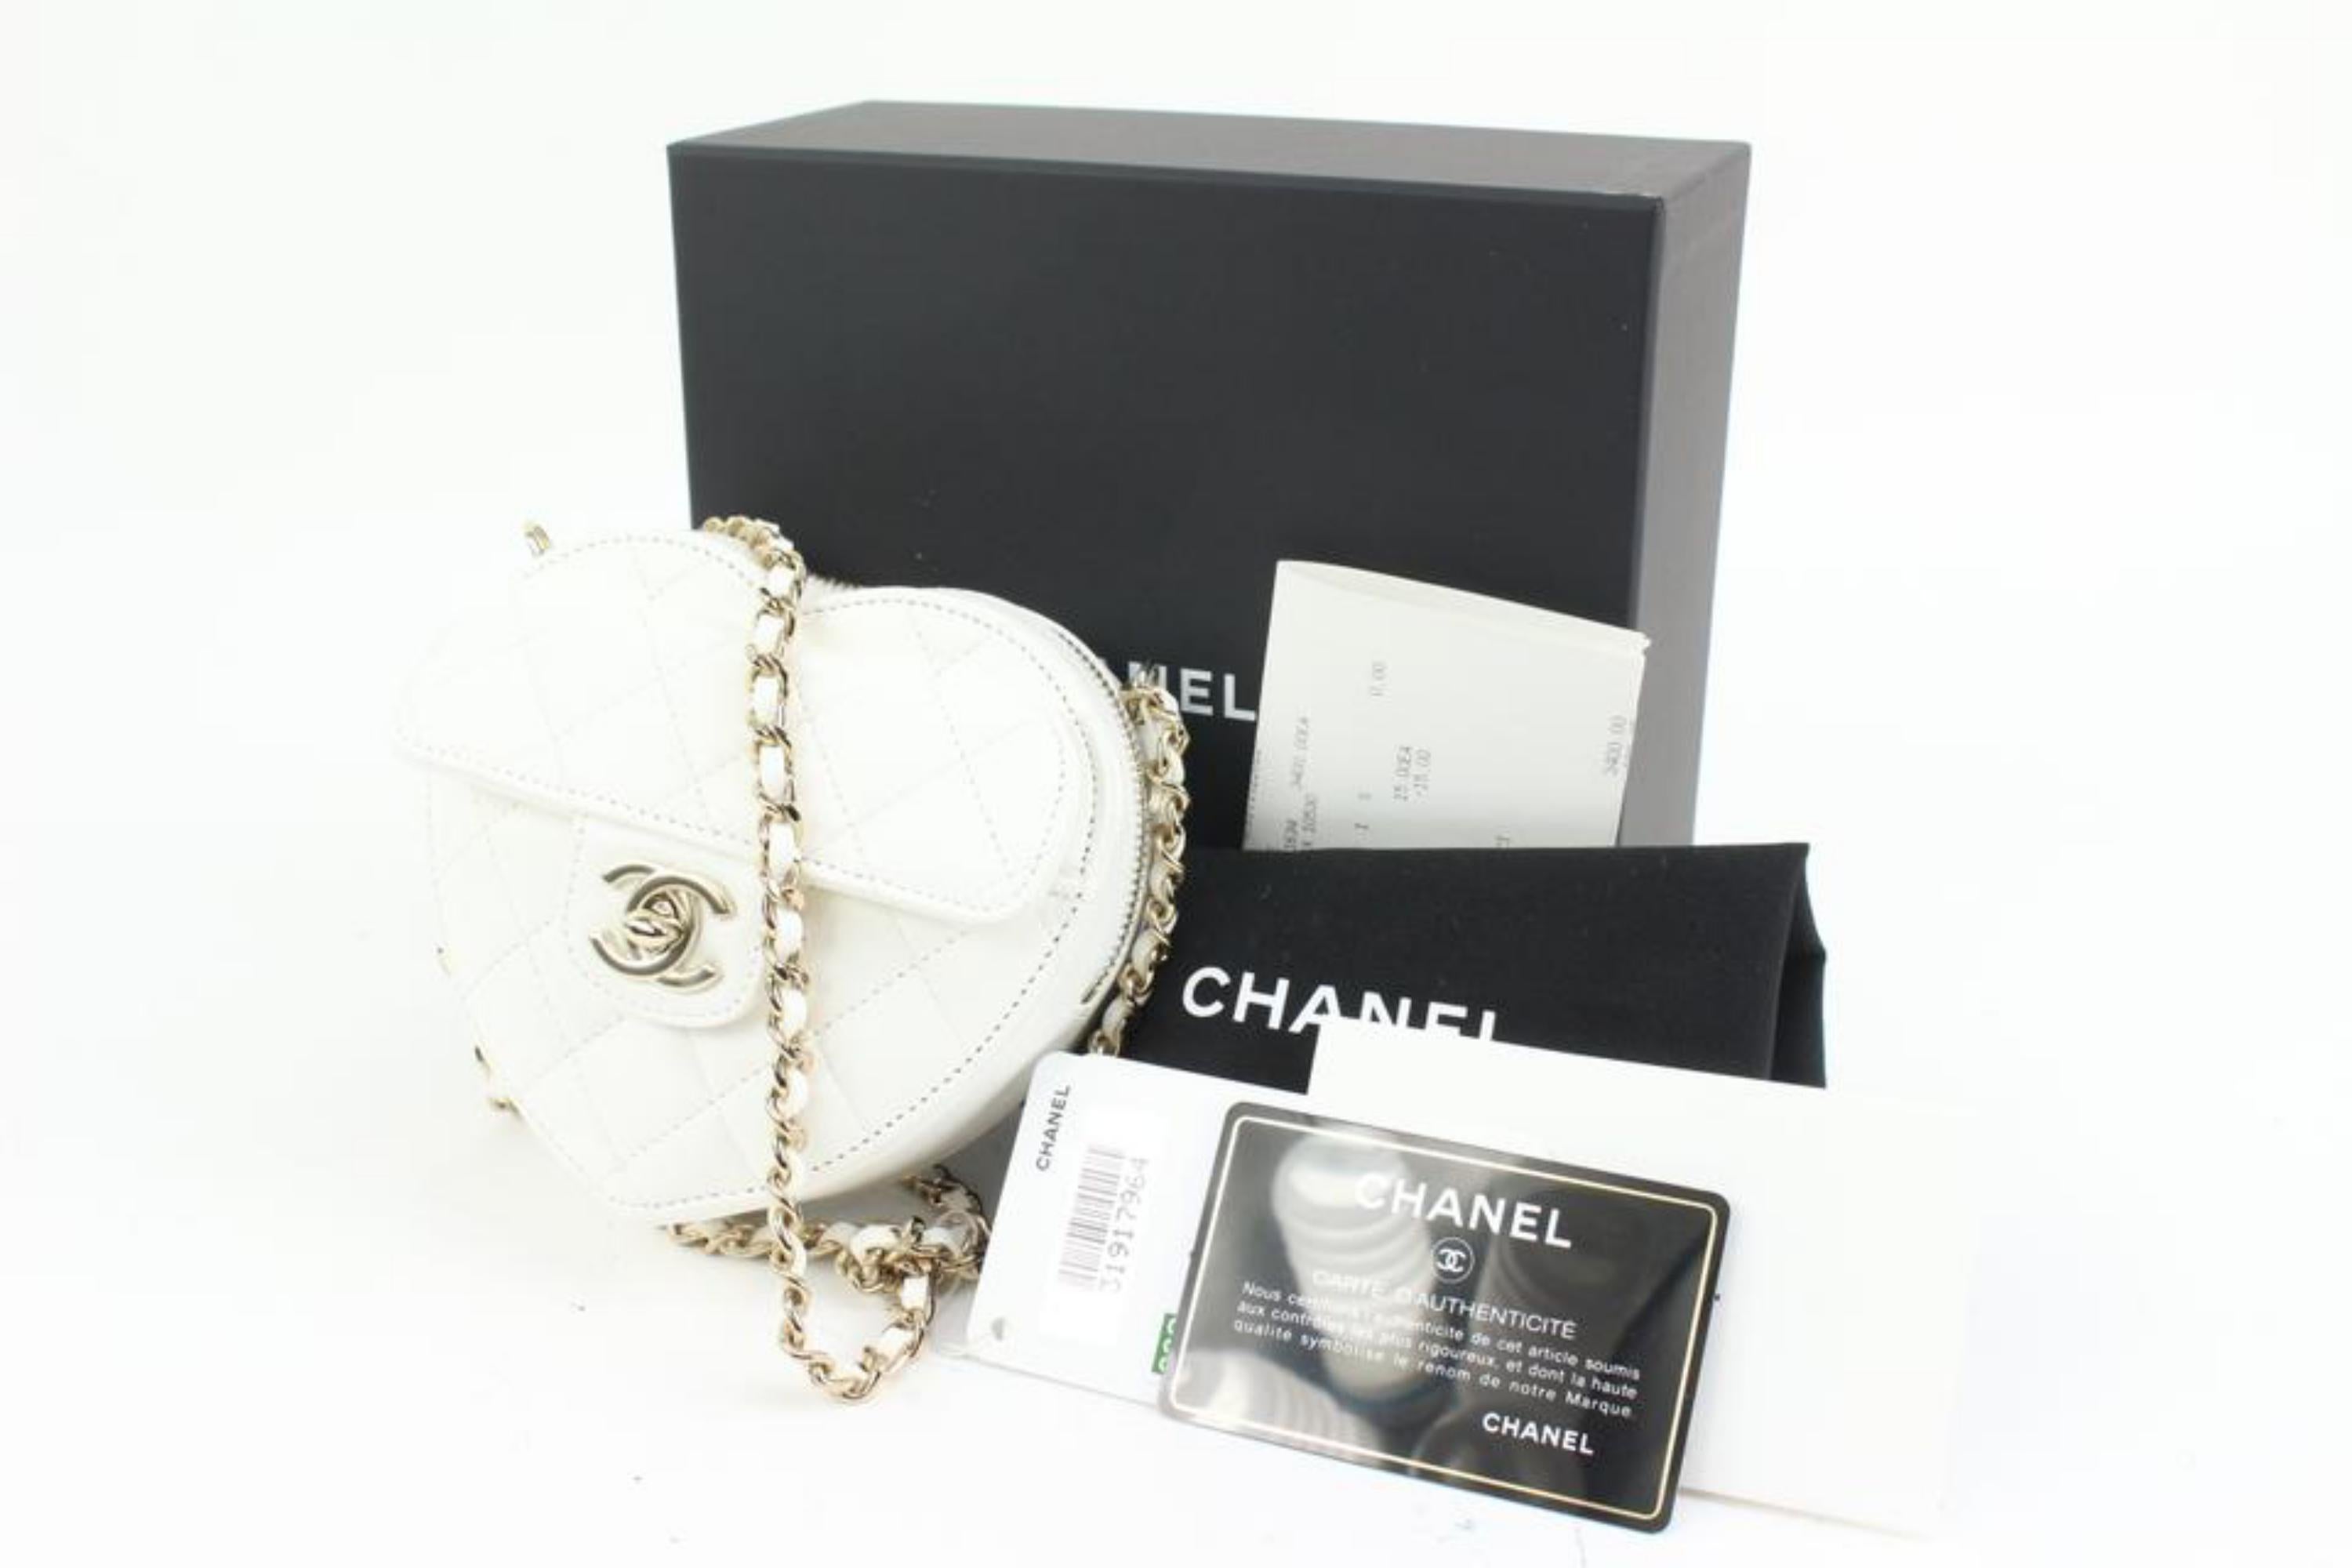 Chanel White Quilted Lambskin CC in Love Heart Bag Clutch on Chain 26cz420s
Date Code/Serial Number: 31917694
Made In: France
Measurements: Length:  5.1